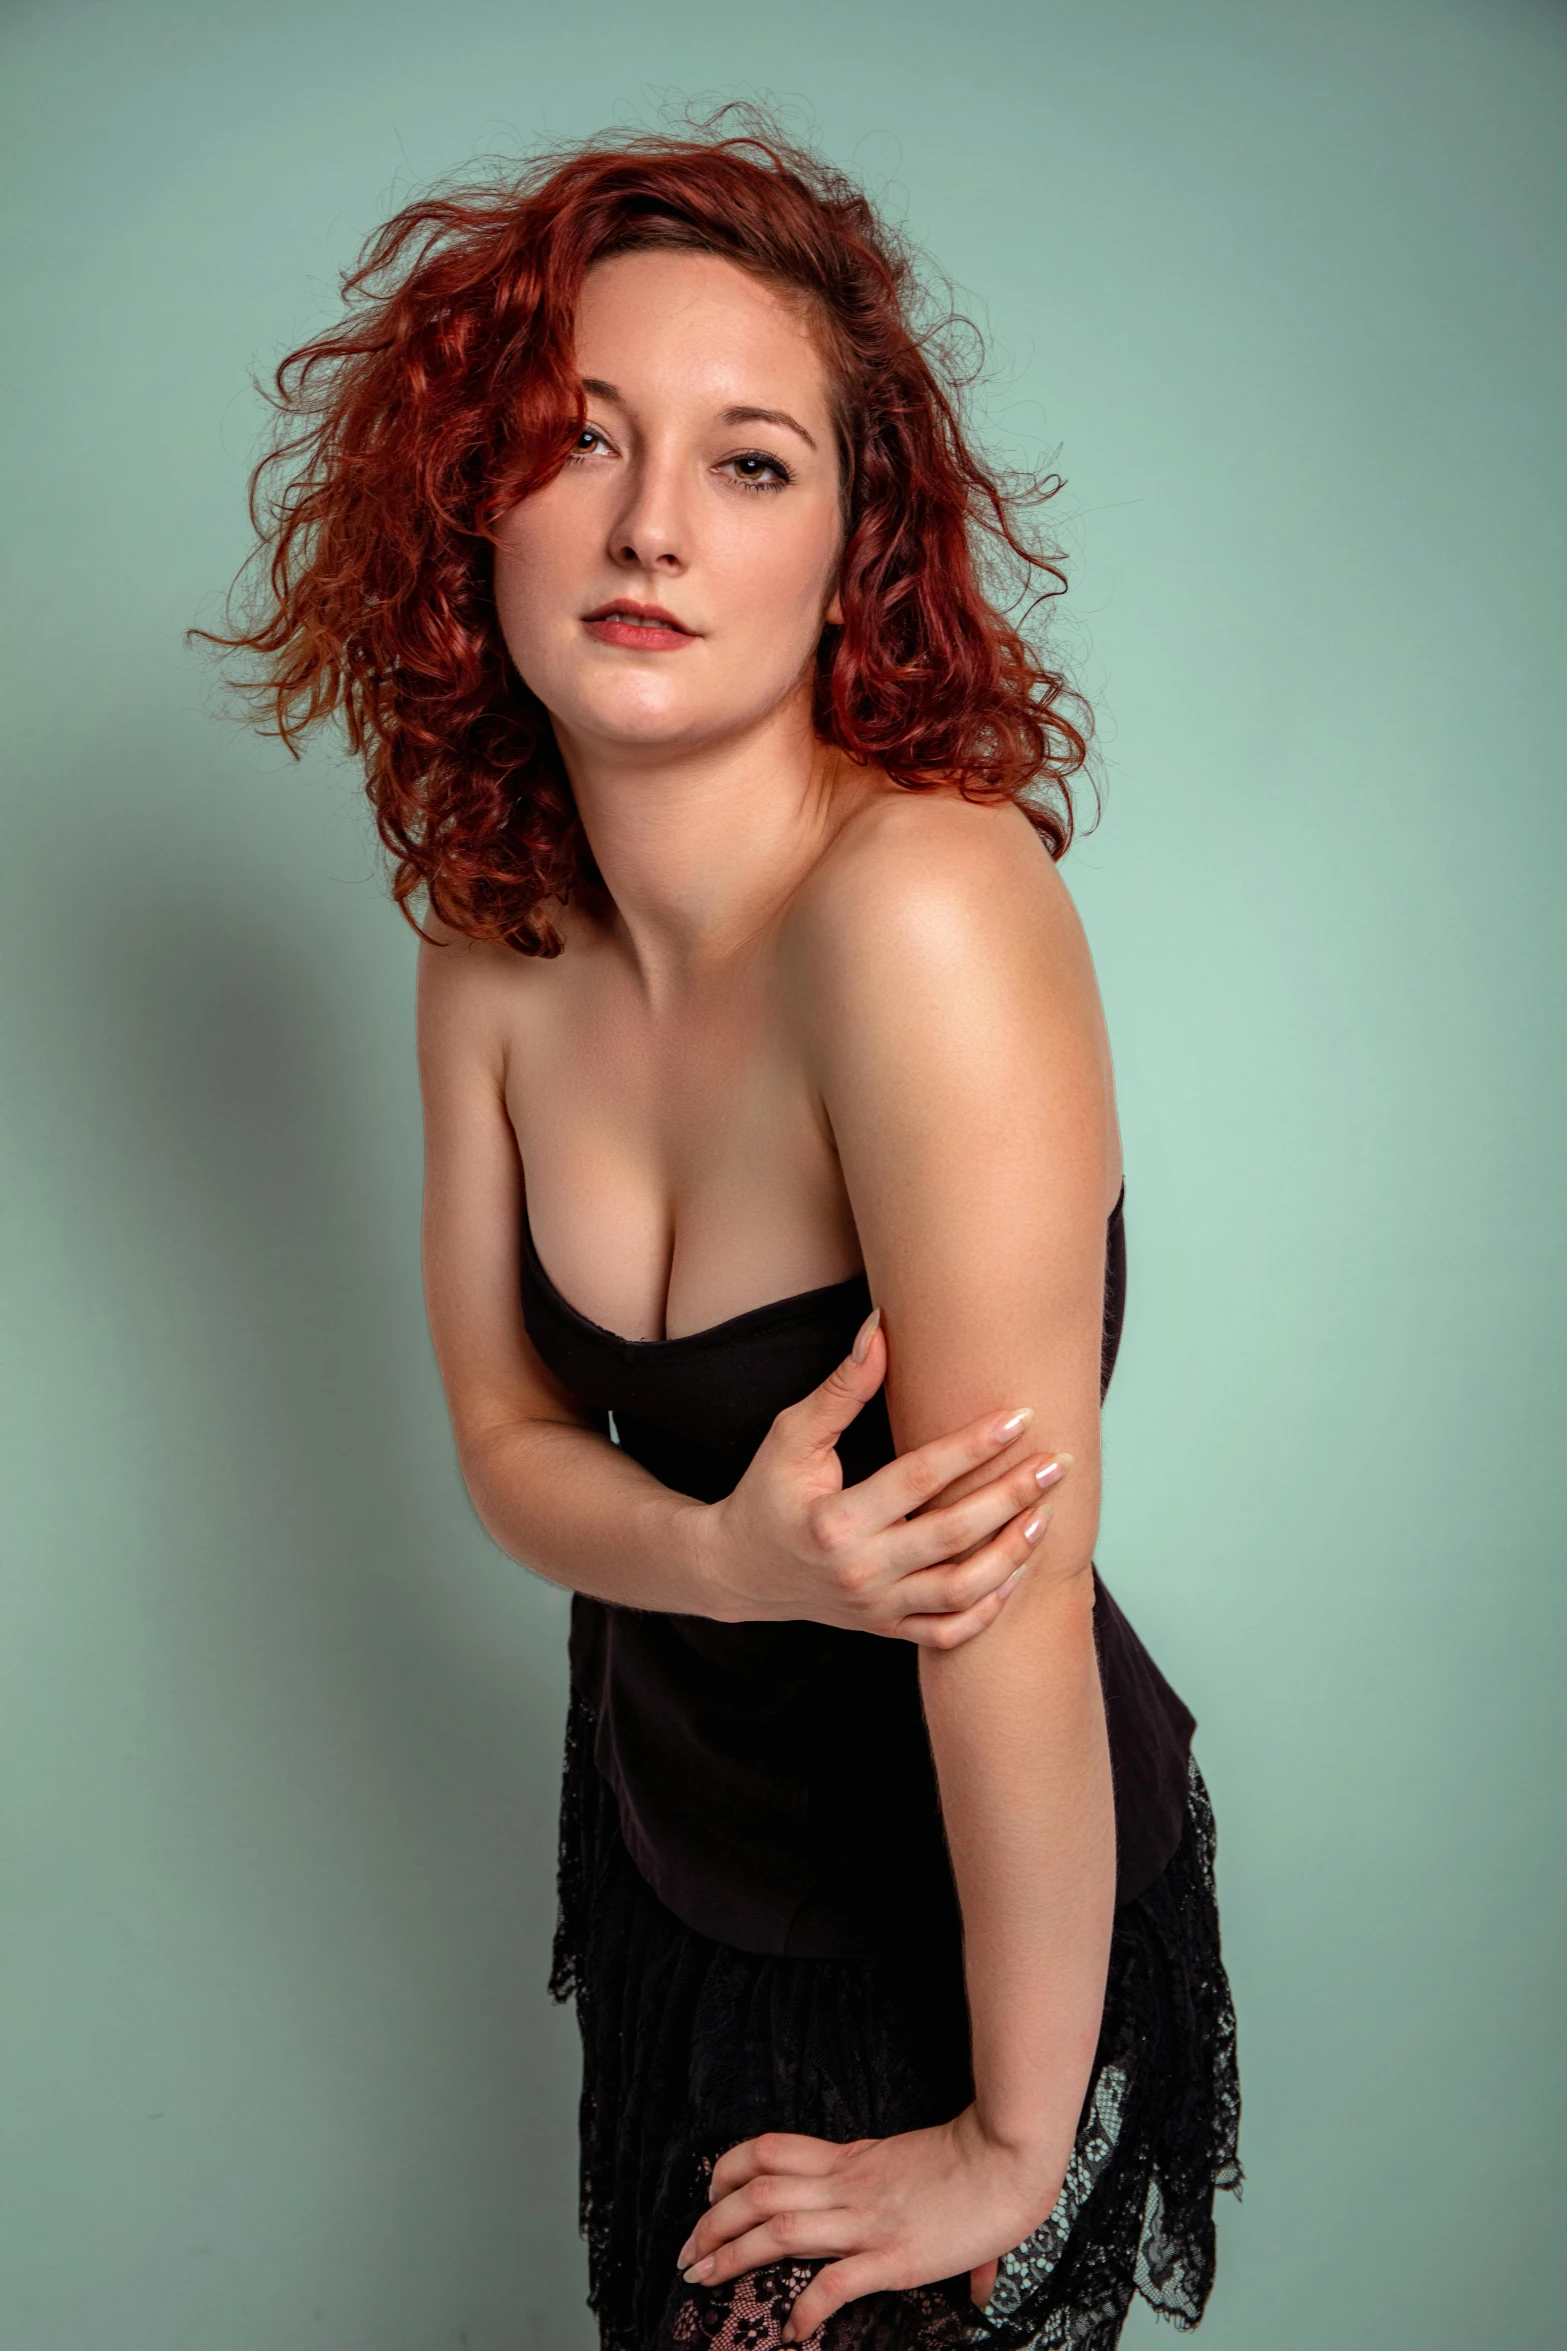 a woman with red hair is posing in an all black dress